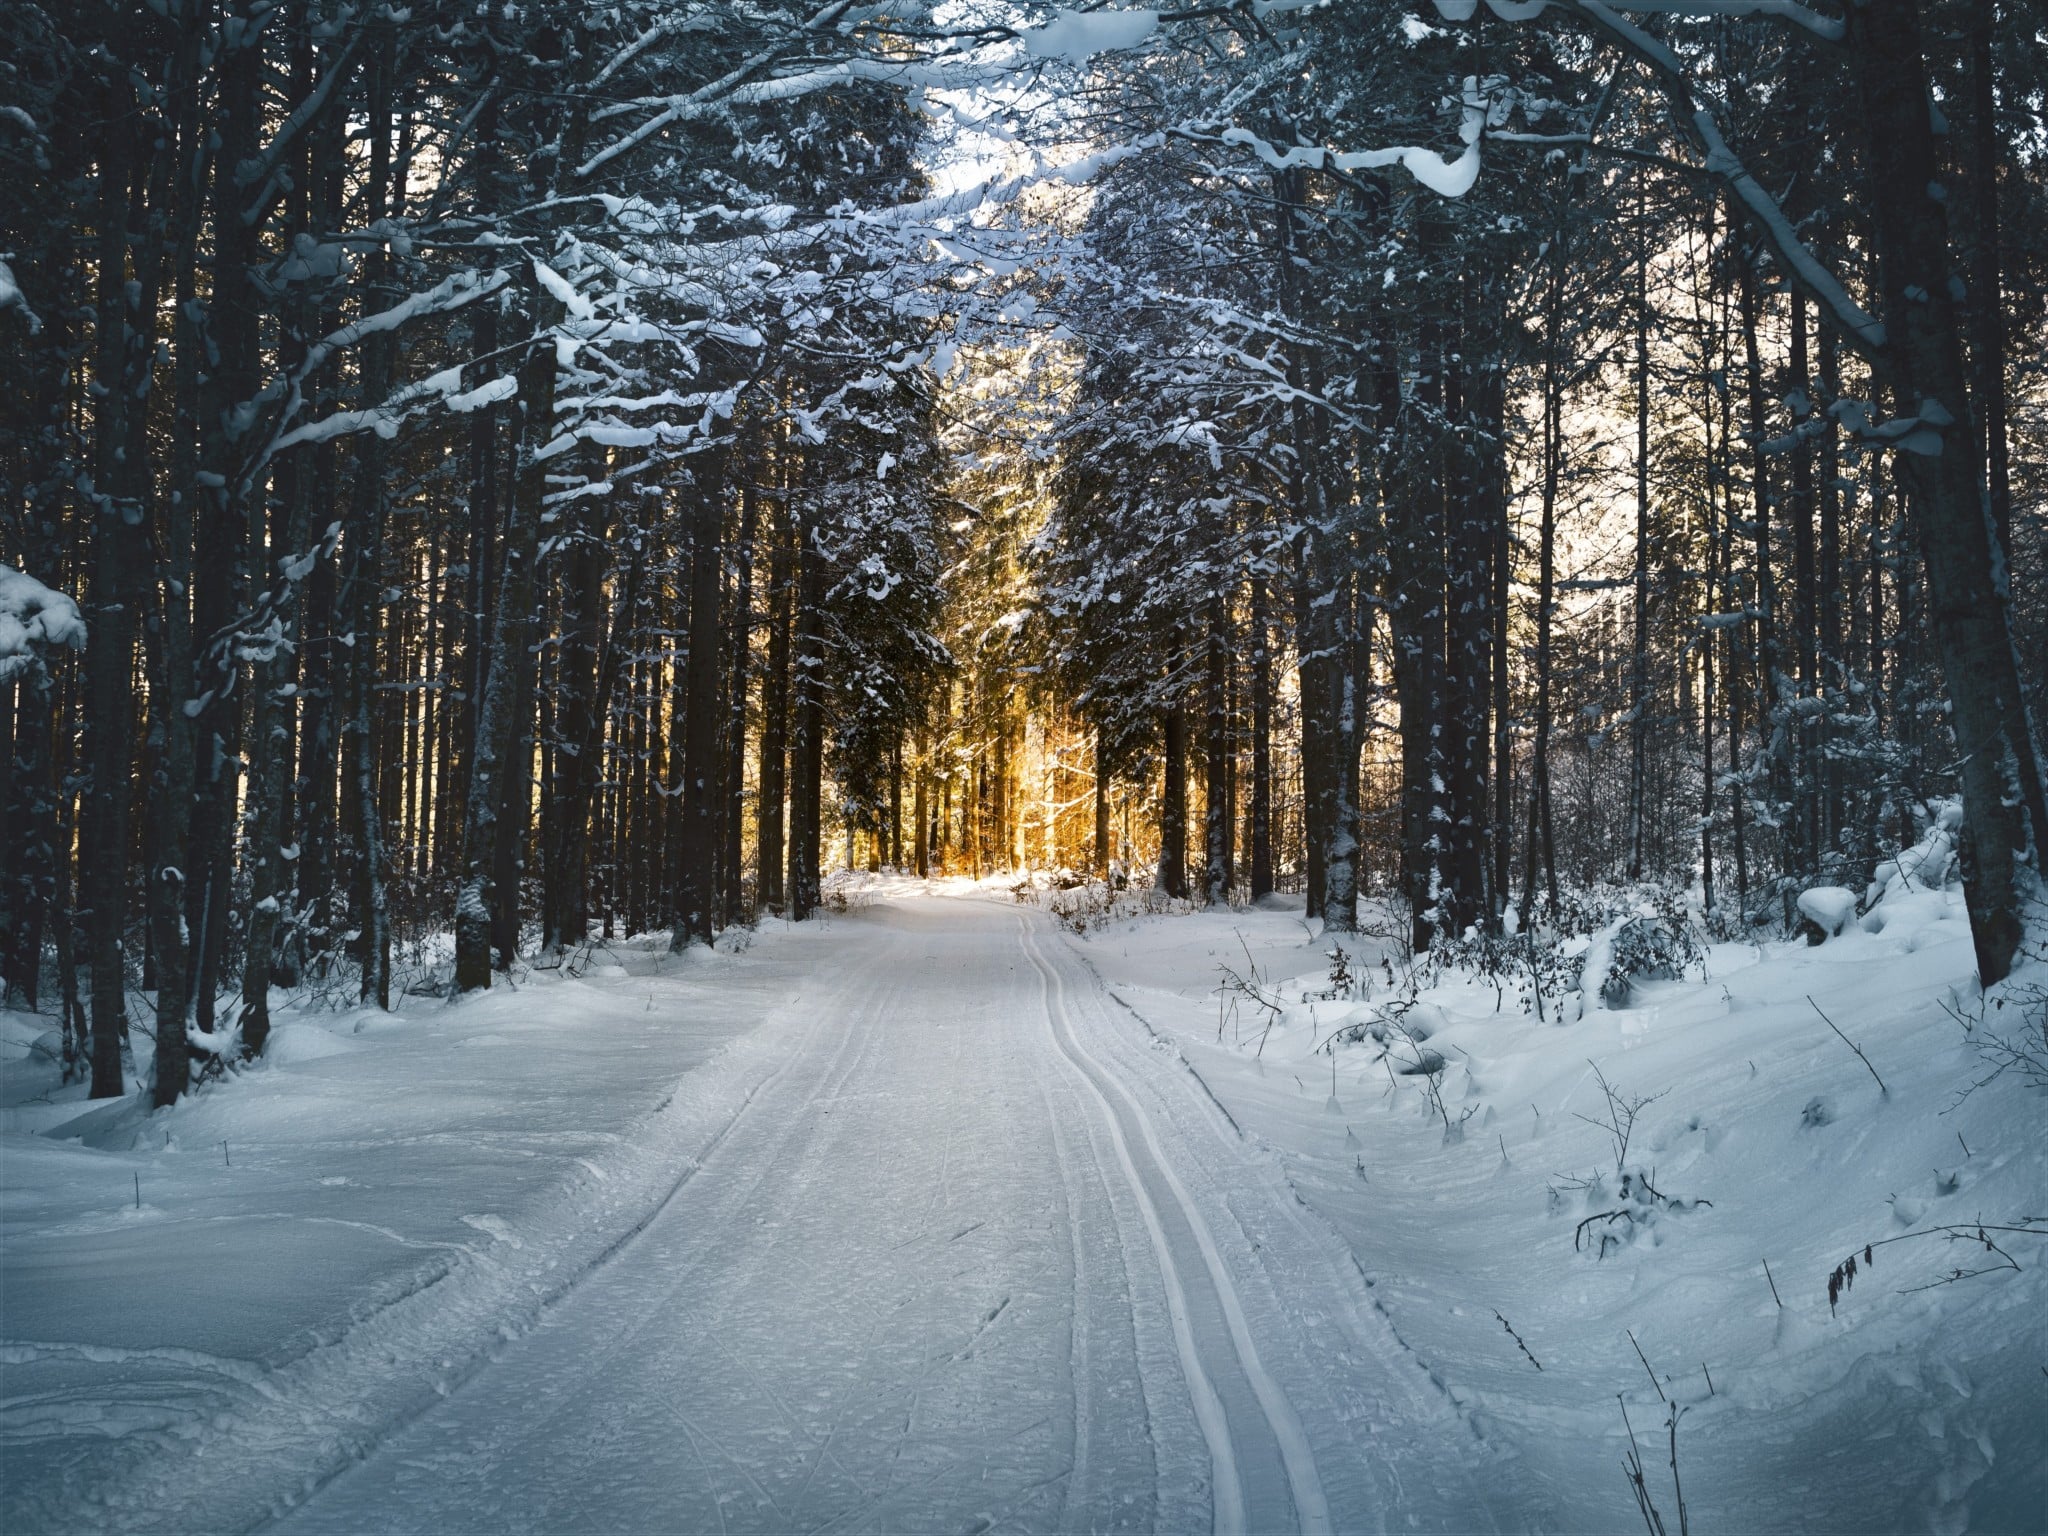 a road surrounded by trees, with snow on the ground